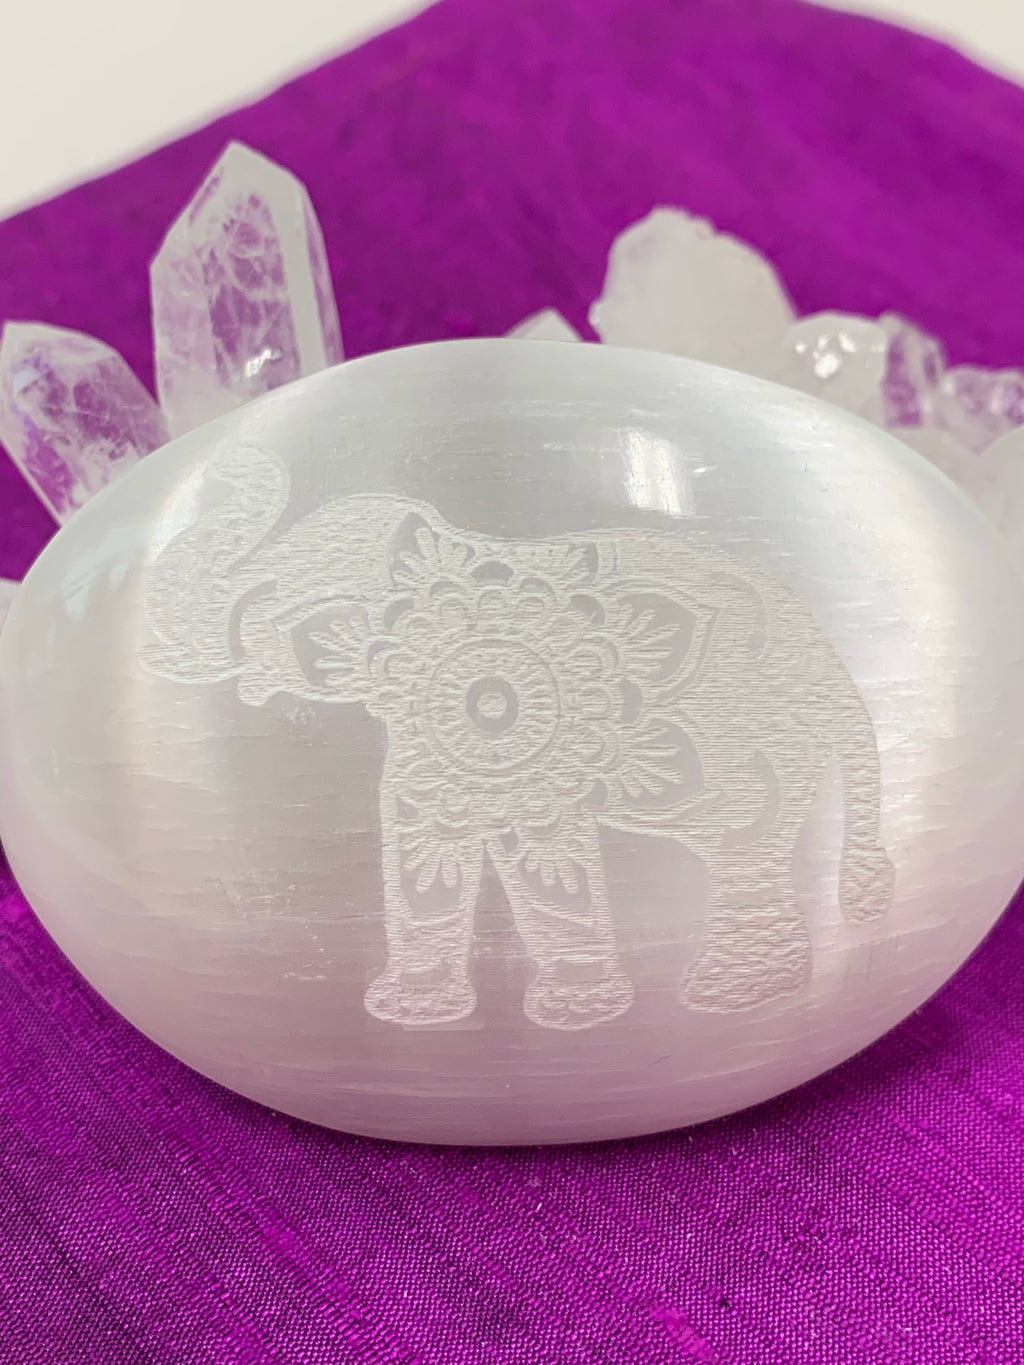 Ornately designed elephant etched on a smooth, polished selenite palm stone. The selenite stone can range from translucent to milky white in color. The weight of the stone varies, but the average weight is 4.2 oz and the average size is 3"x2.5", the perfect size to hold in the palm of your hand. These selenite stones are handmade and ethically sourced - workers are paid living wages.